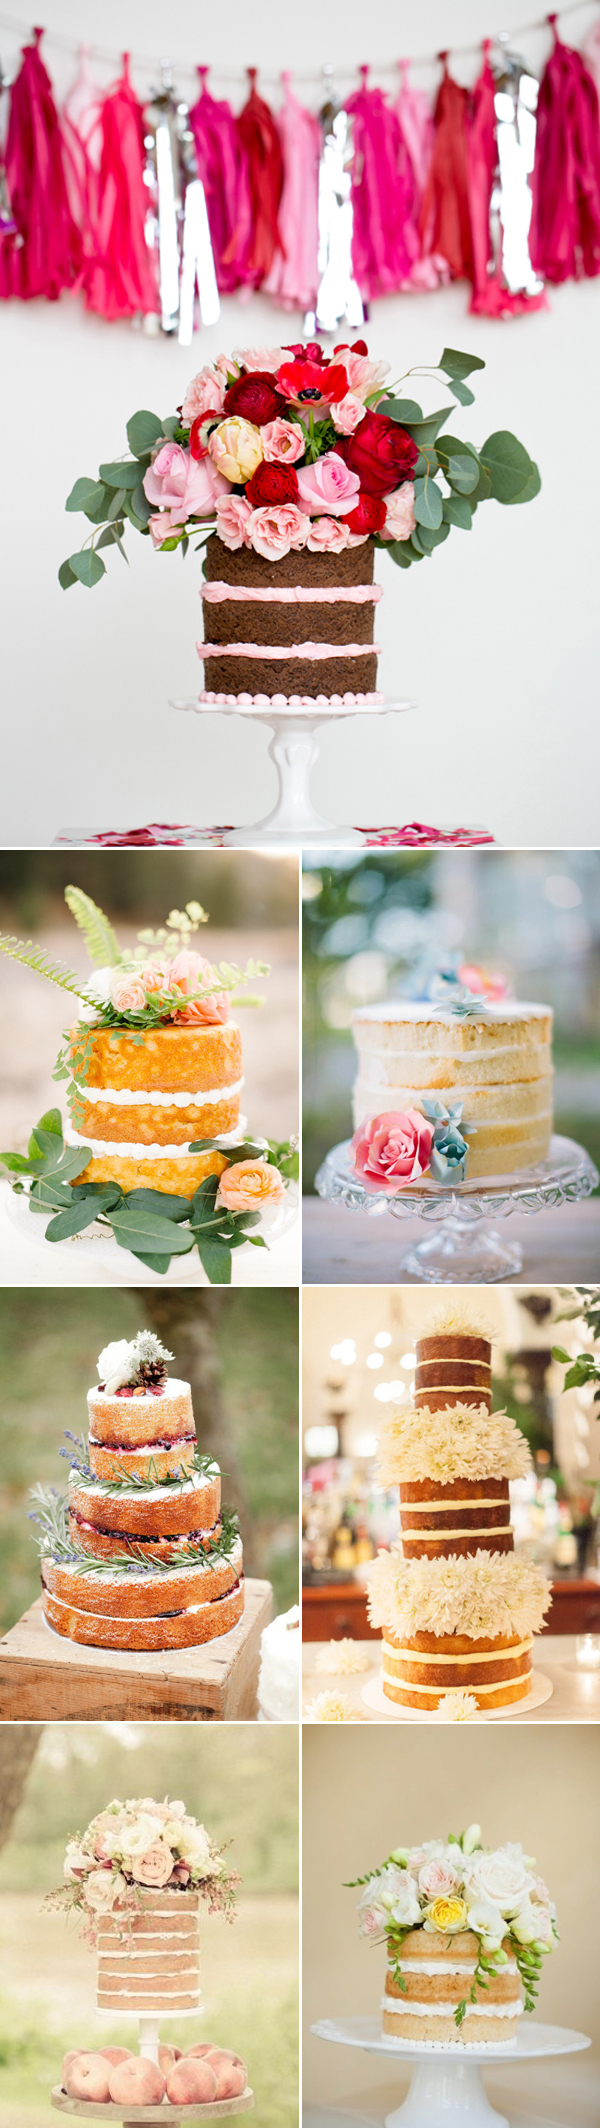 Rustic Wedding Cakes Decorated with Fresh Flowers